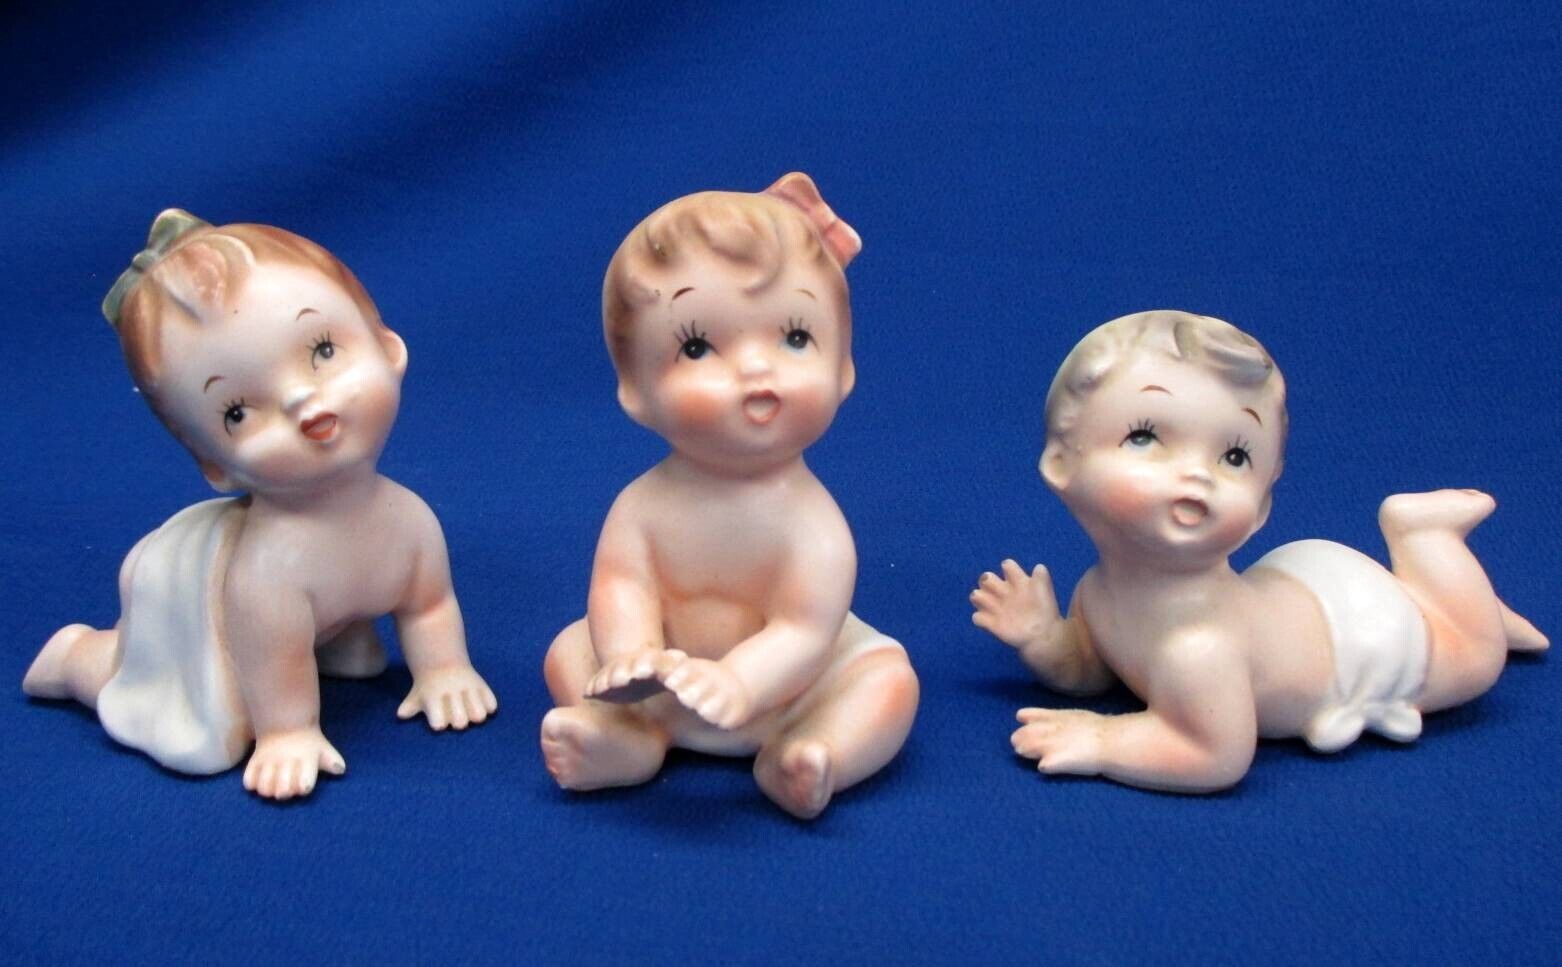 3 1961 INARCO BABIES FIGURINES 2 GIRLS ONE BOY  ORIGINAL STICKERS ON ALL 3